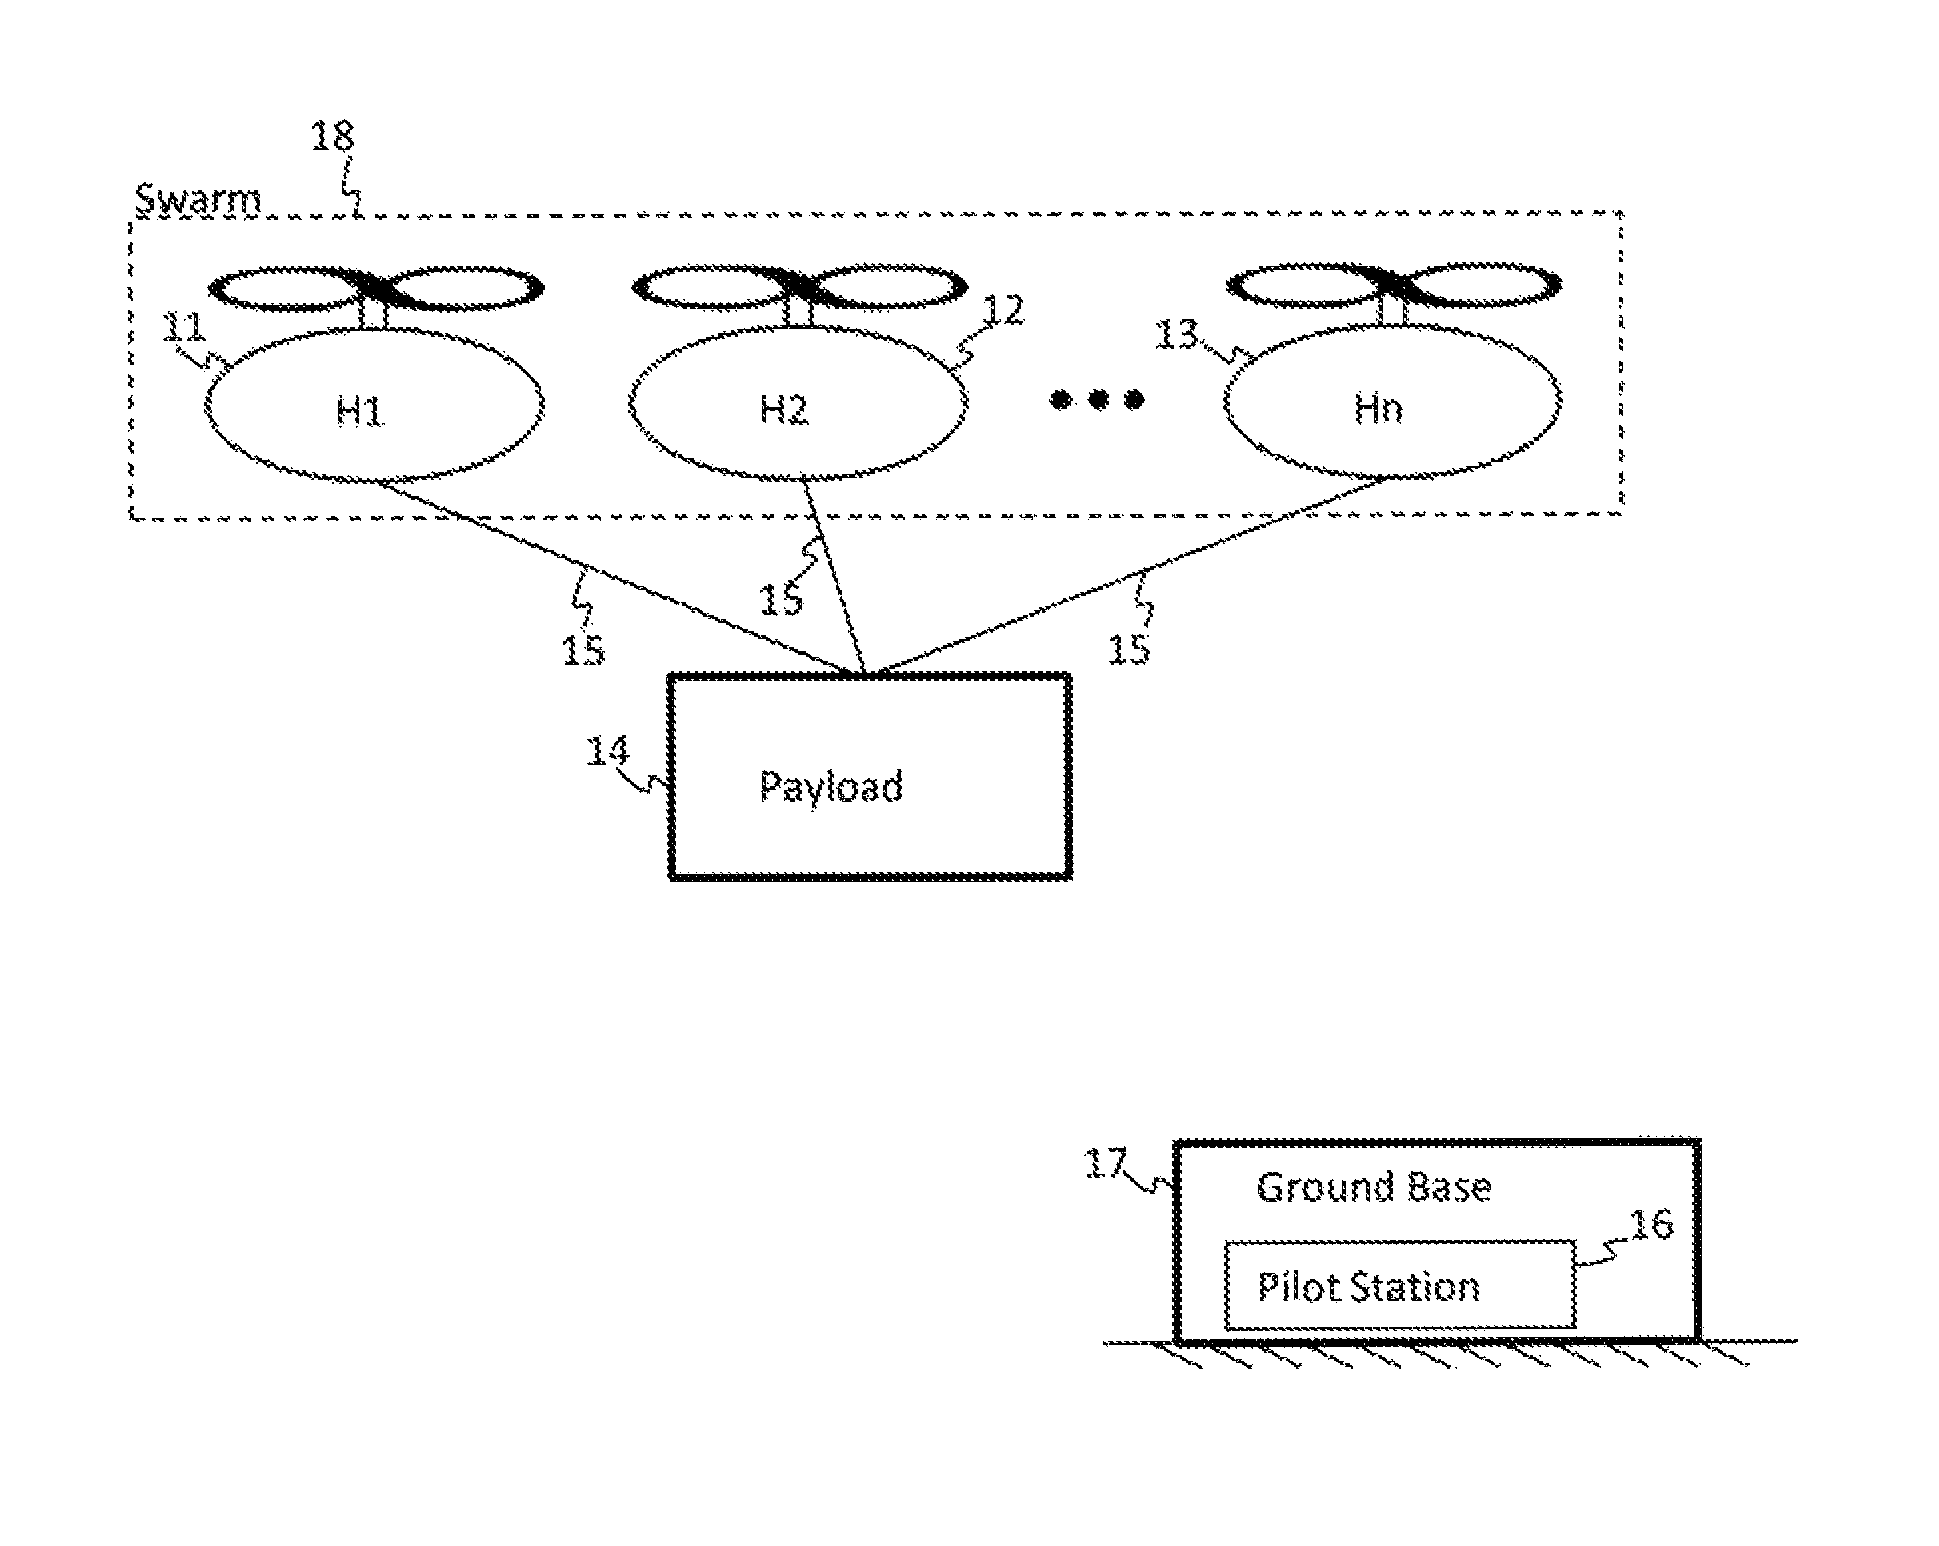 System and method for multiple vehicles moving a common payload